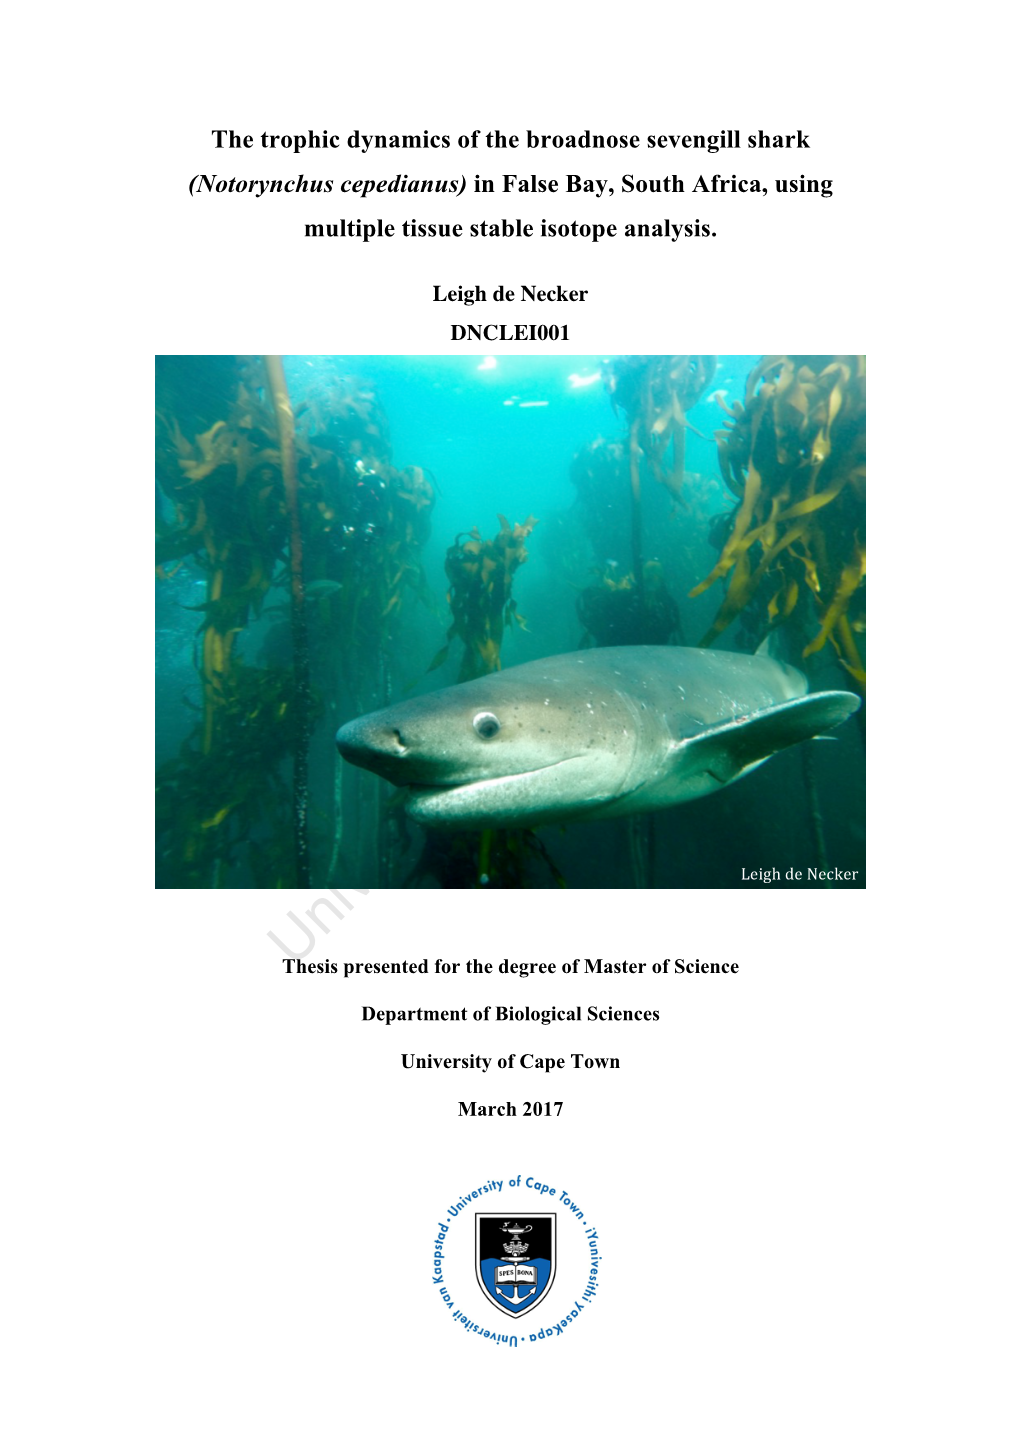 The Trophic Dynamics of the Broadnose Sevengill Shark (Notorynchus Cepedianus) in False Bay, South Africa, Using Multiple Tissue Stable Isotope Analysis